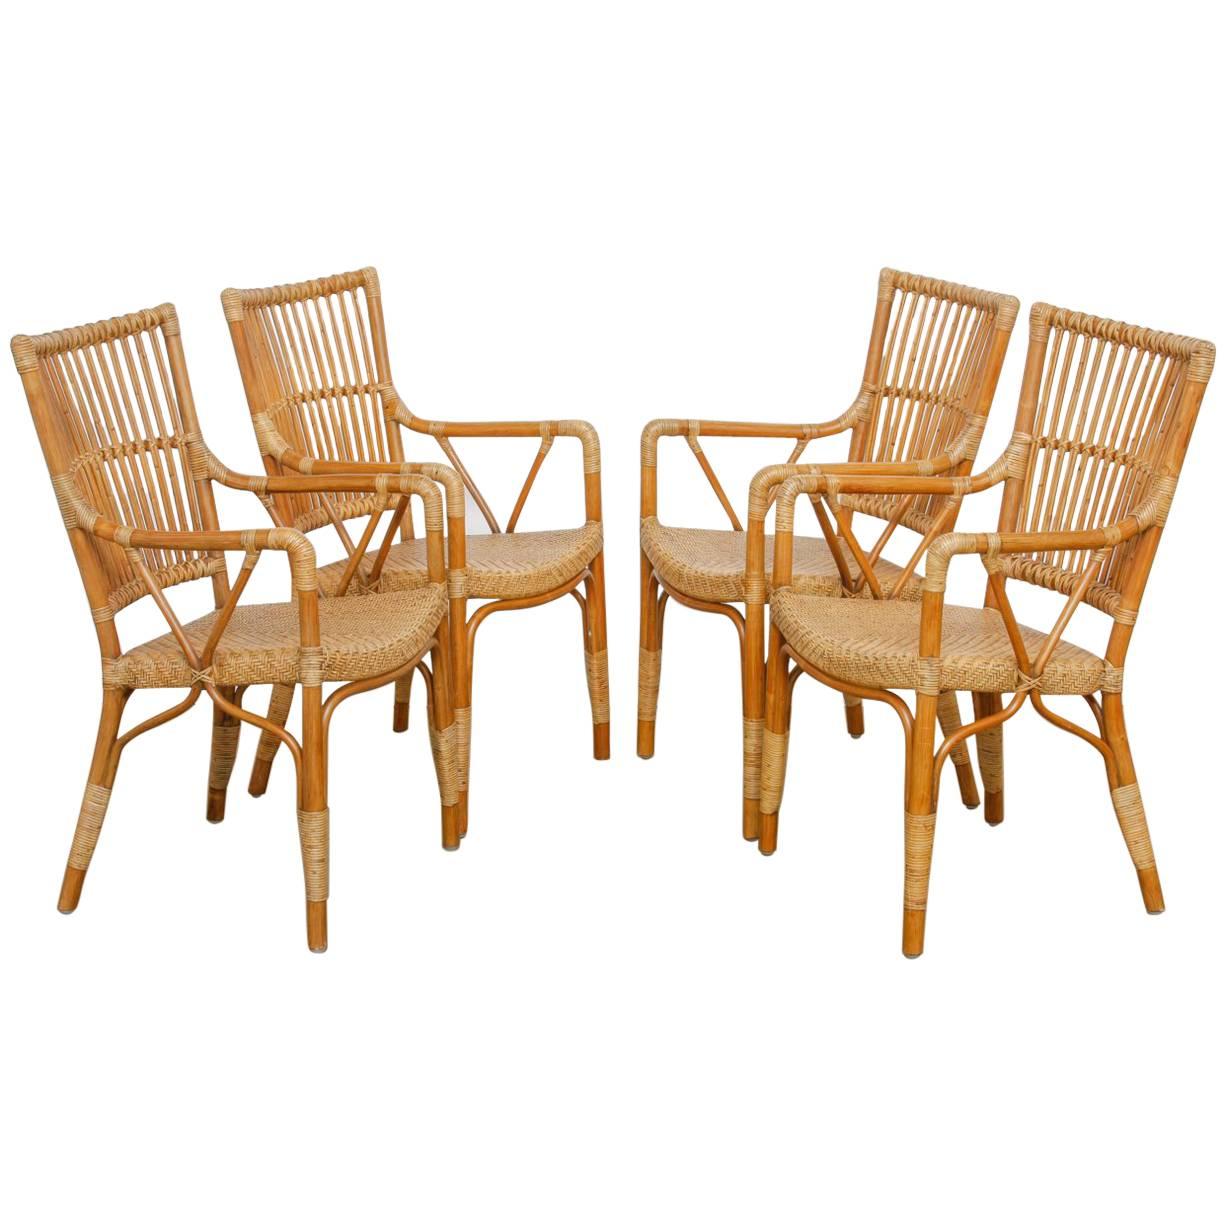 Stylish set of Six Danish modern dining chairs constructed from bamboo, rattan, and wicker. These Scandinavian chairs are made in the manner of McGuire with bent rattan frames. Square back rests are joined to a soft woven seat supported by round